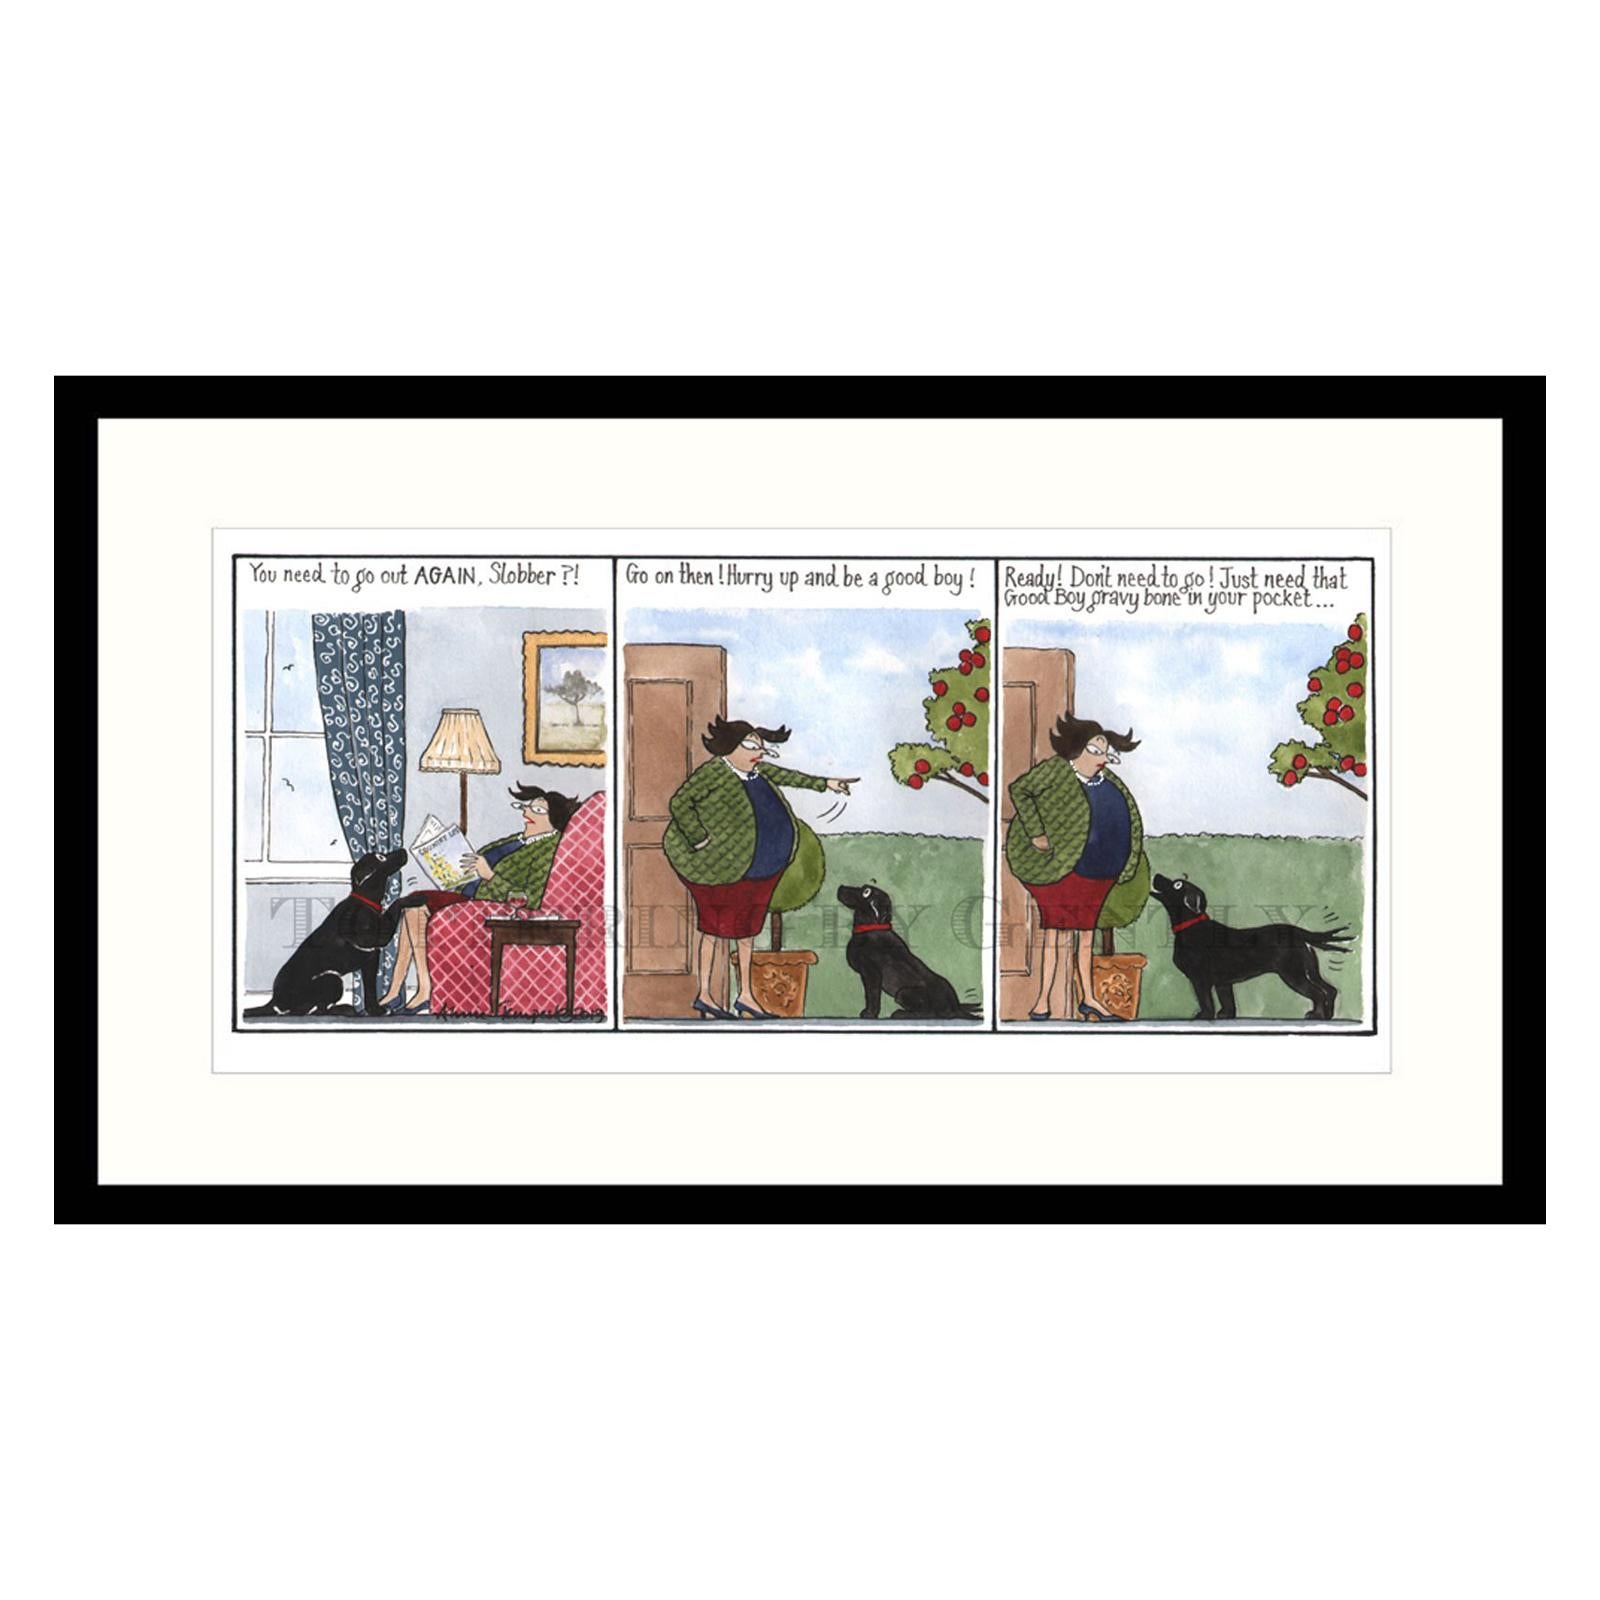 Dog Needs to Go Out Again, Humorous Dog Print For Sale